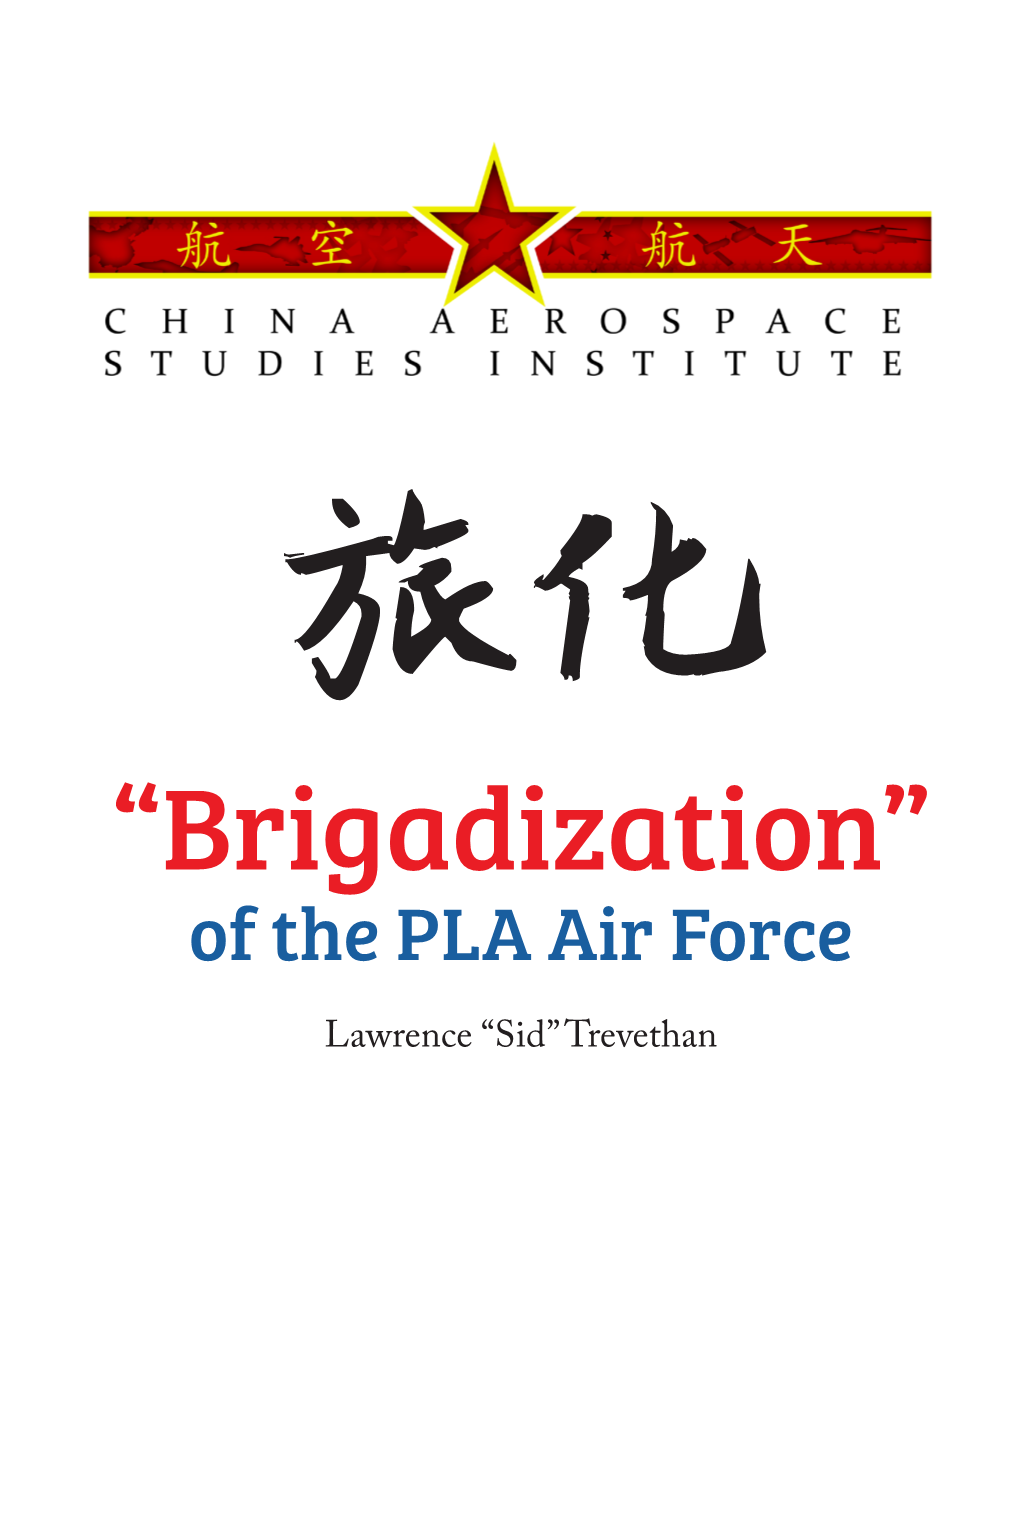 Lawrence “Sid” Trevethan Printed in the United States of America by the China Aerospace Studies Institute